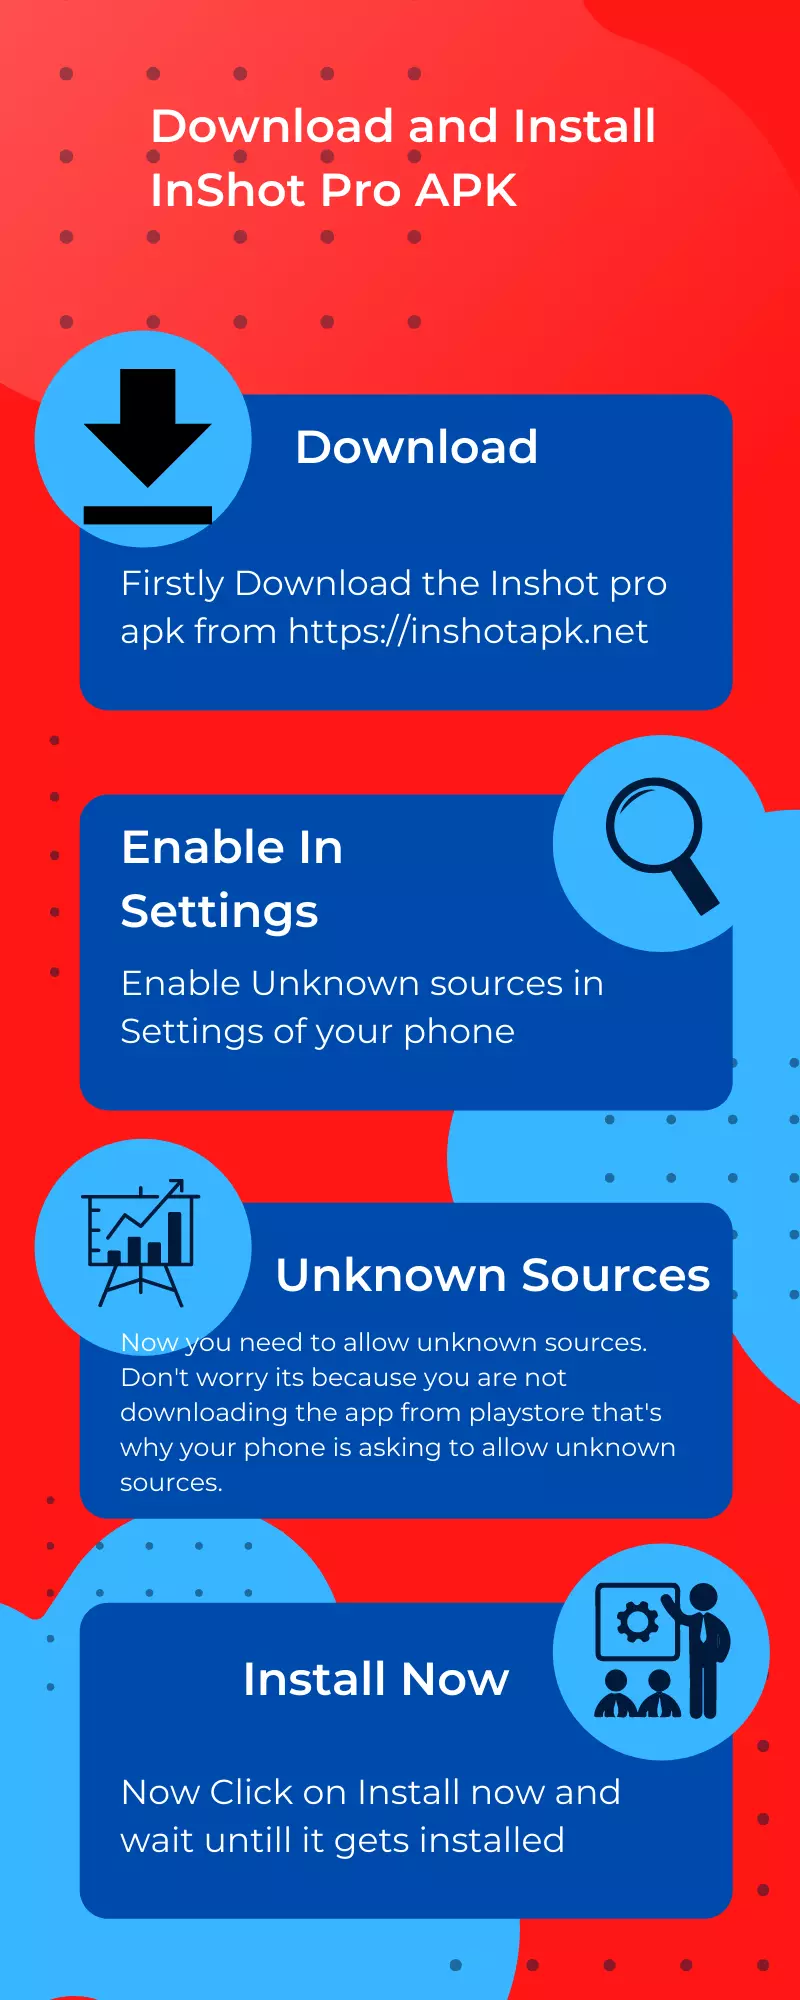 Download and Install InShot Pro APK Infographics